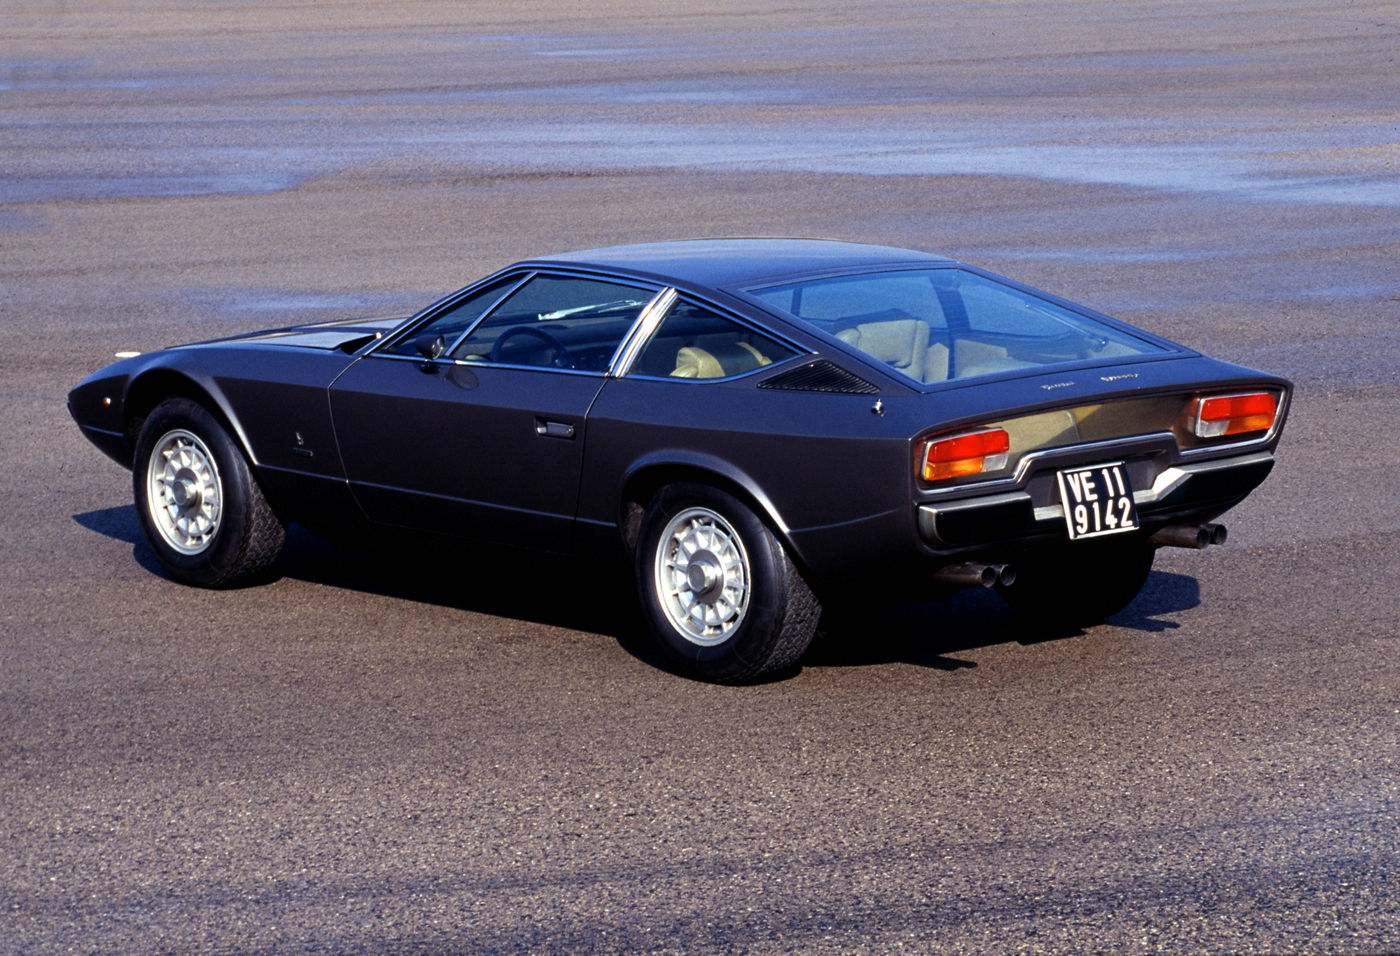 1974 Maserati Khamsin - exterior view of the classic 2-door coupe